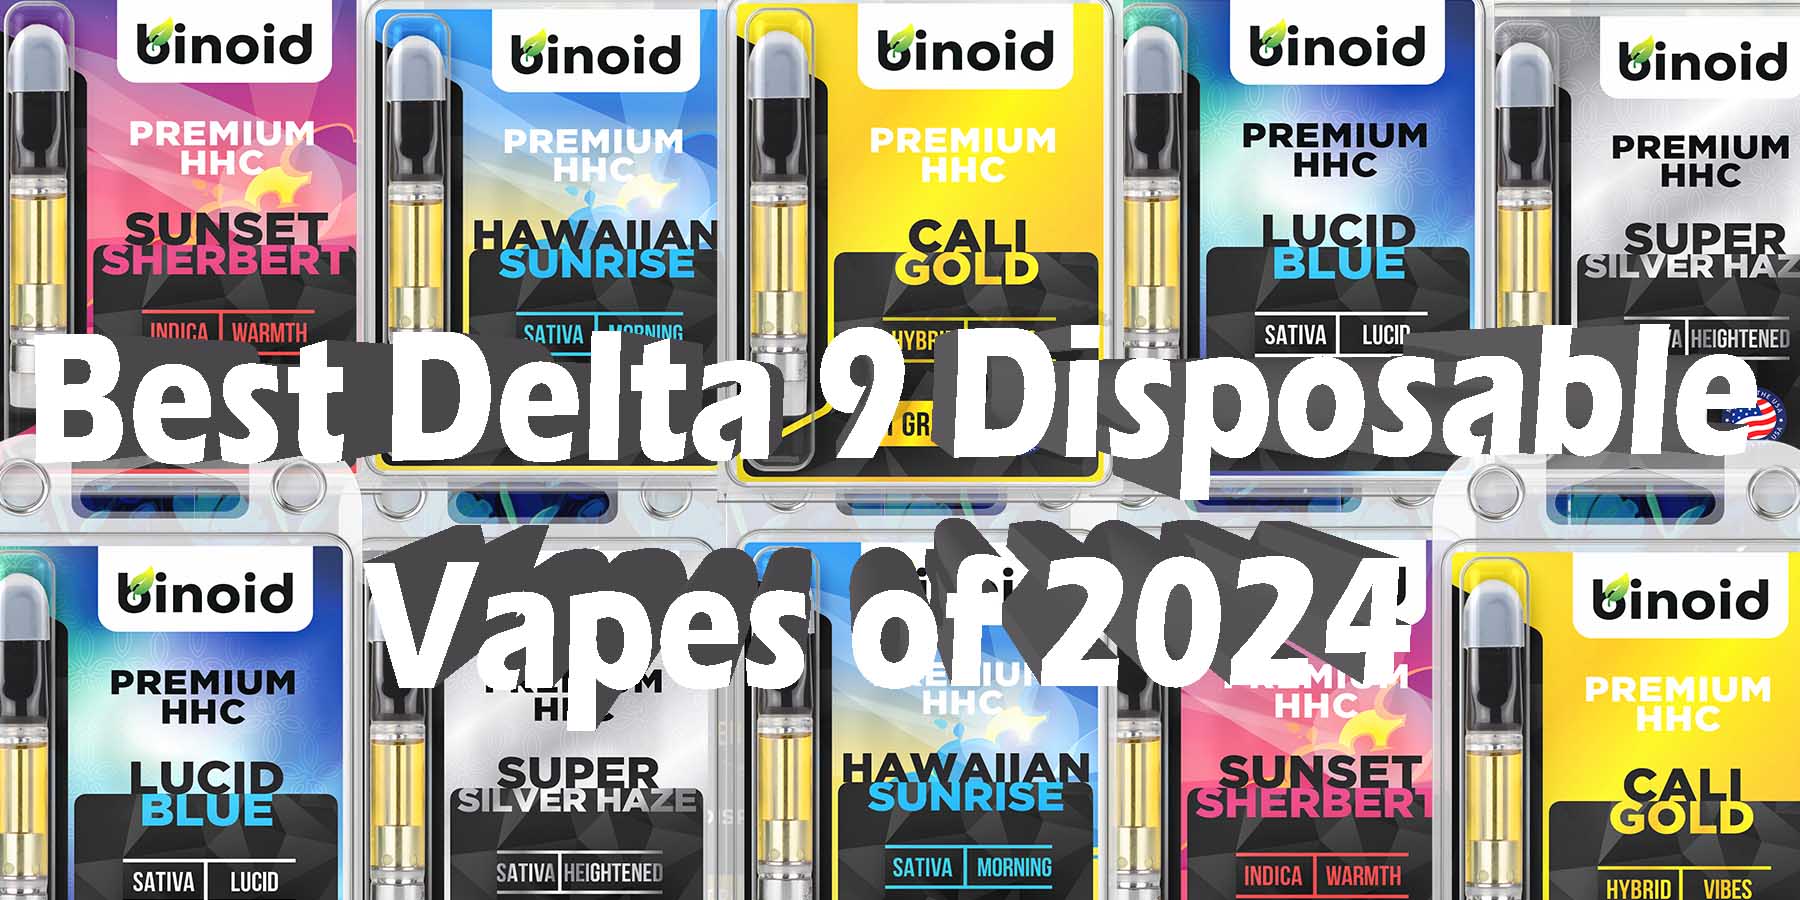 Best Delta 9 Disposable Vapes of 2024 WhatYouMust Know WhereToGet HowToGetNearMe BestPlace LowestPrice Coupon Discount StrongestBrand BestBrand Binoid